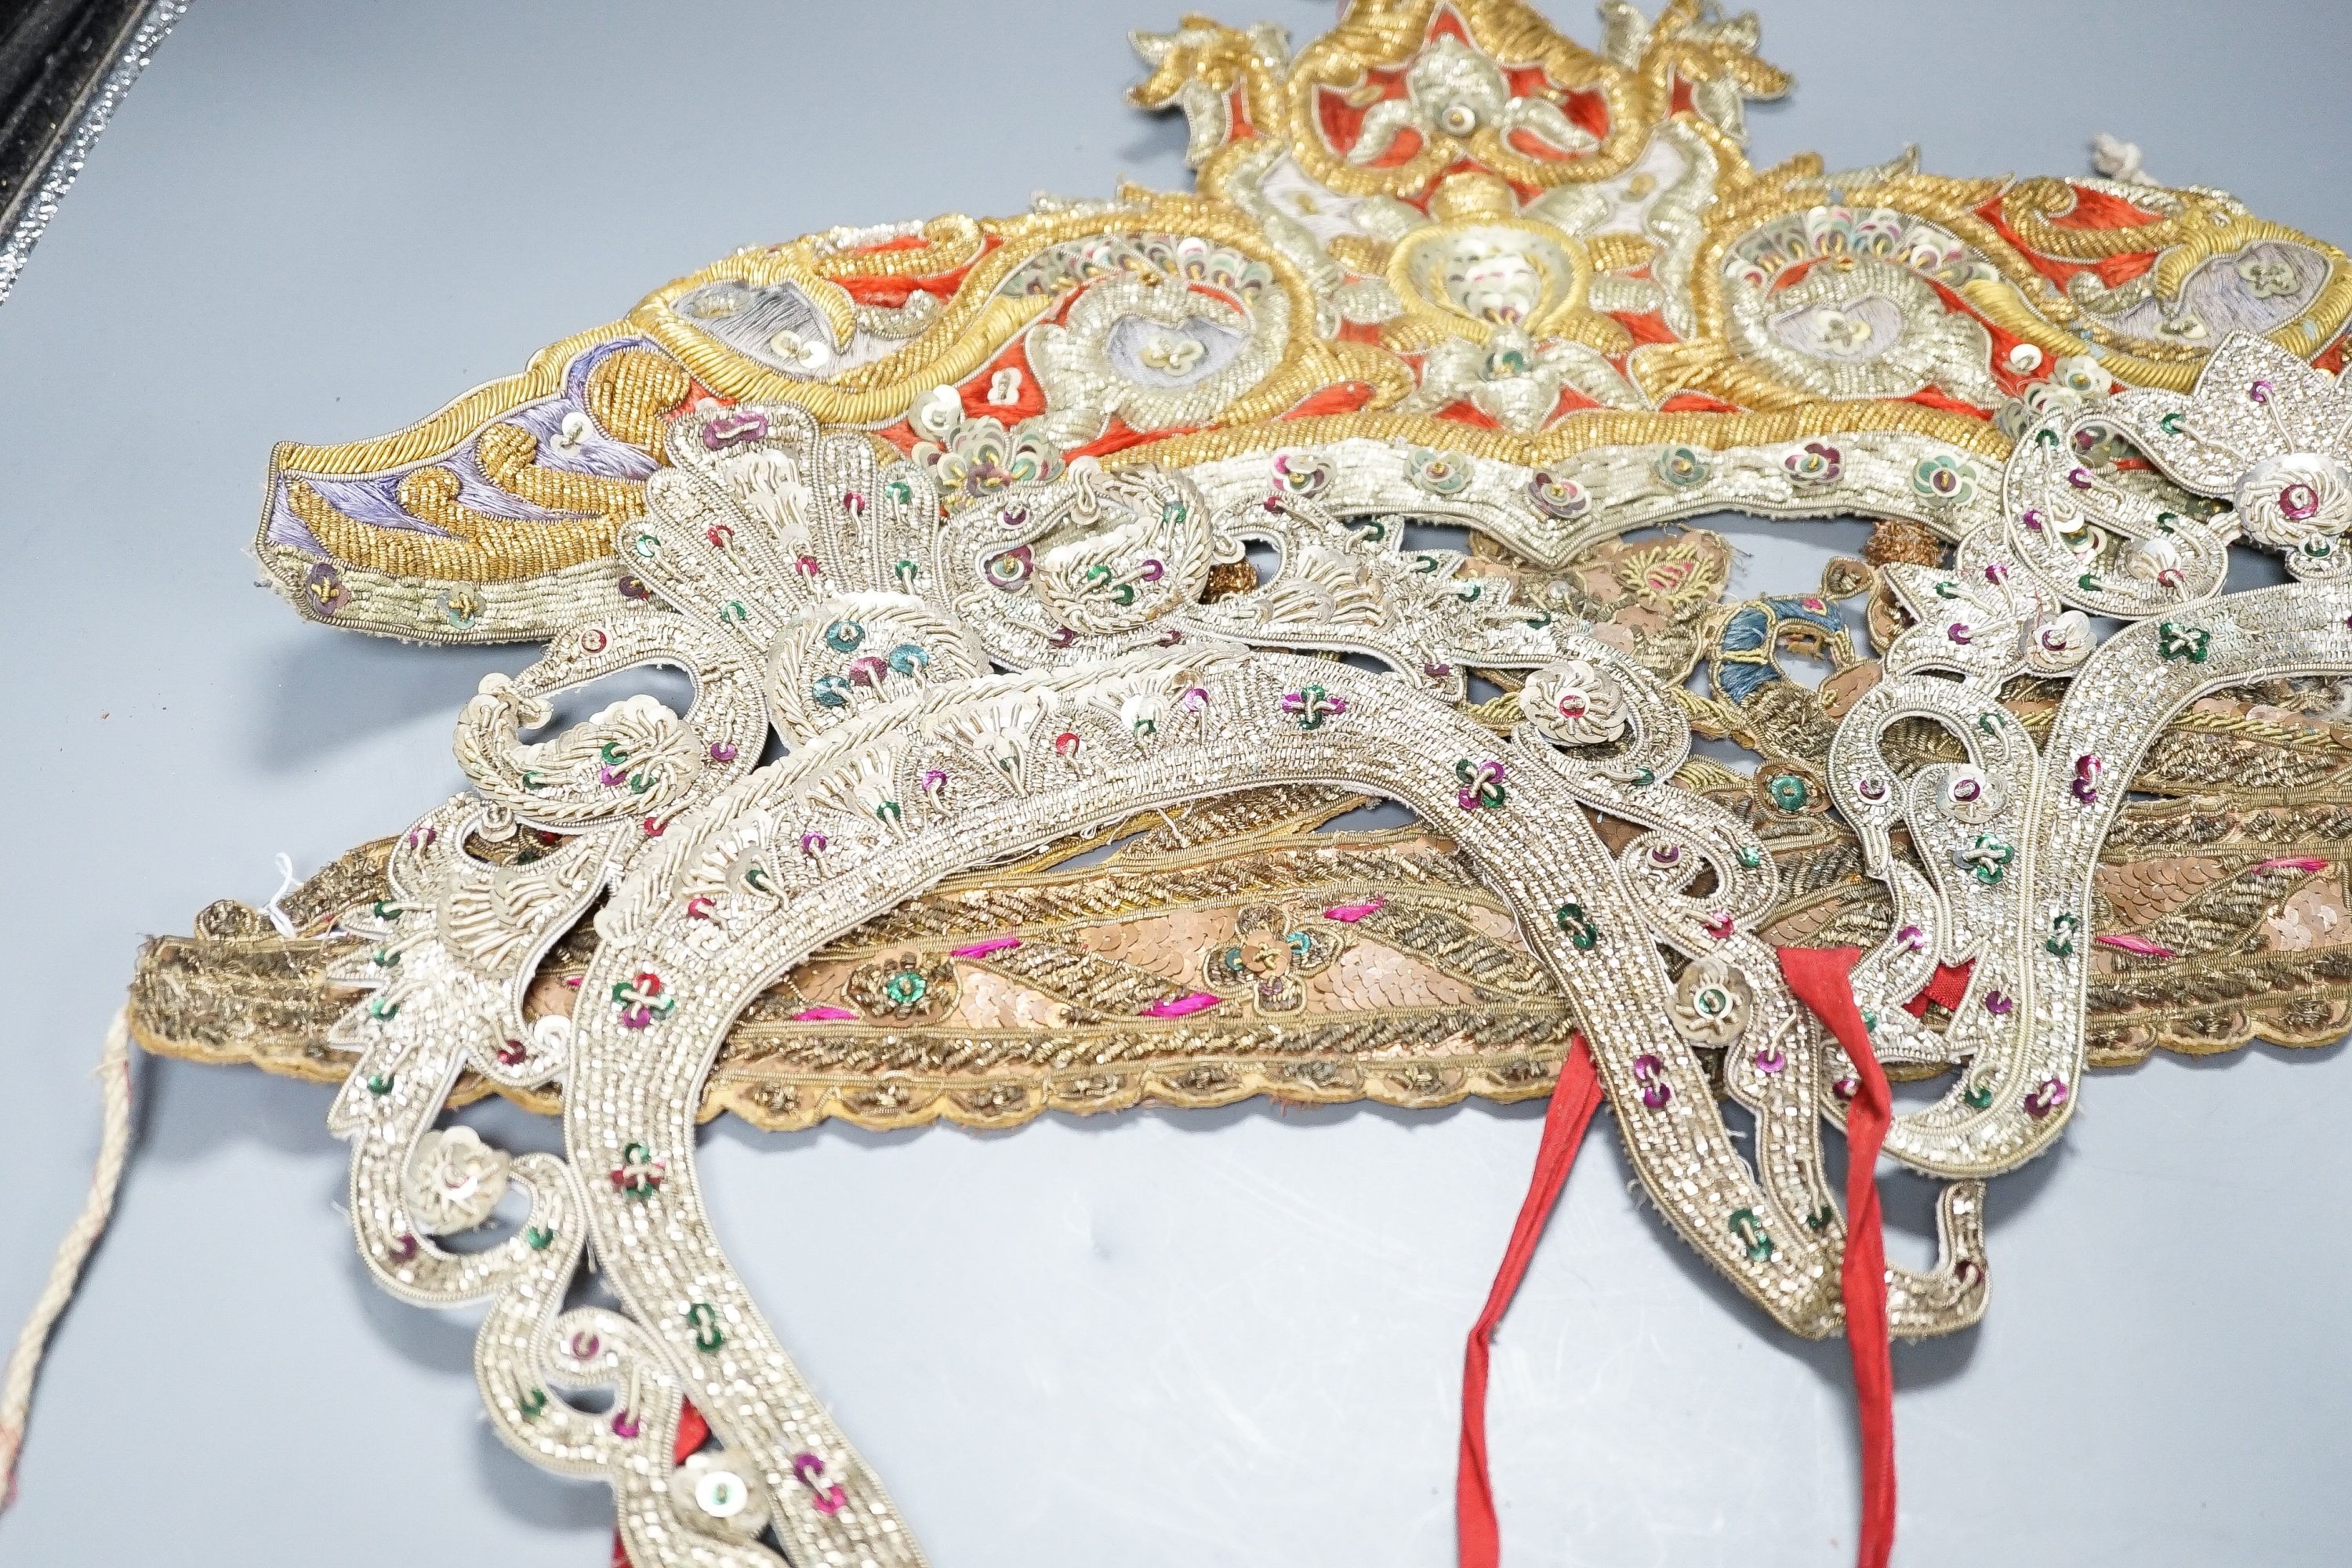 Highly ornate indian silver and gold thread headresses